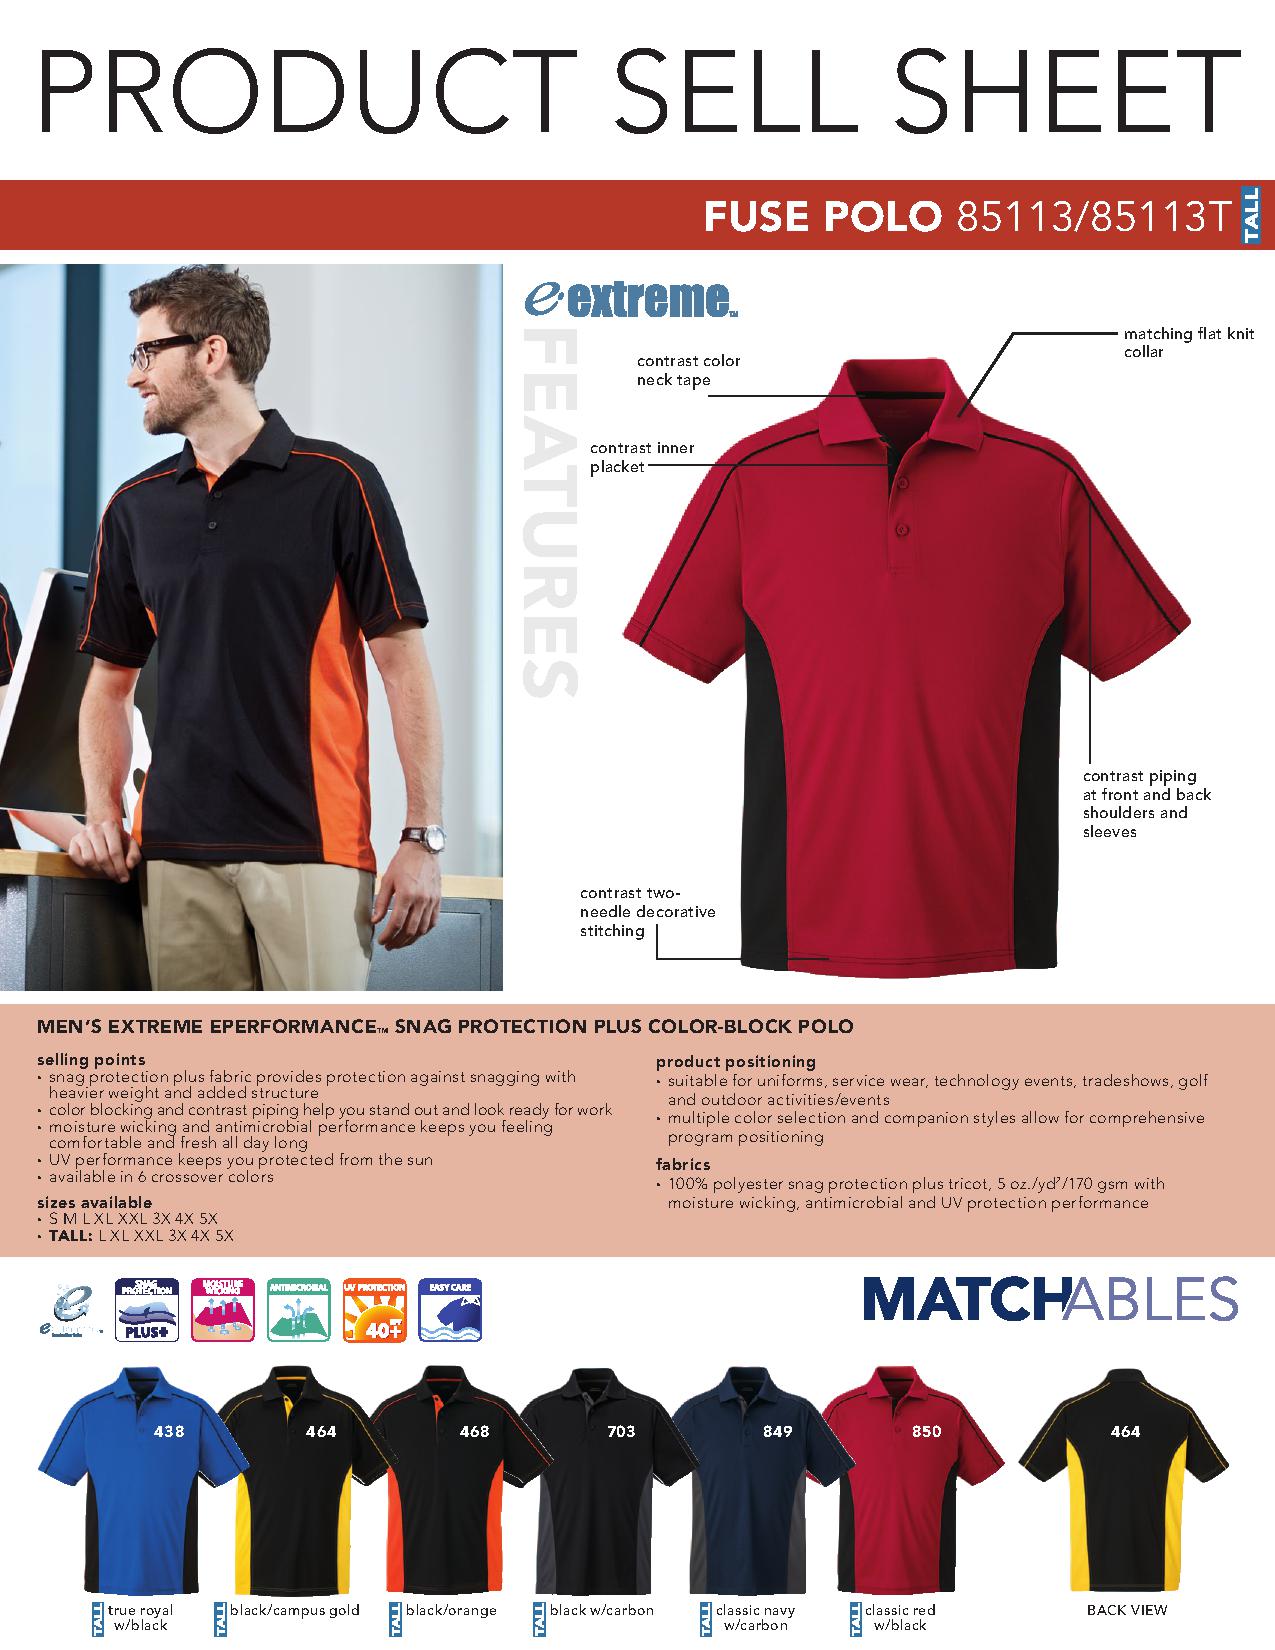 Ash City Eperformance 85113 - Fuse Polo Men's Snag Protection Plus Color-Block Polo